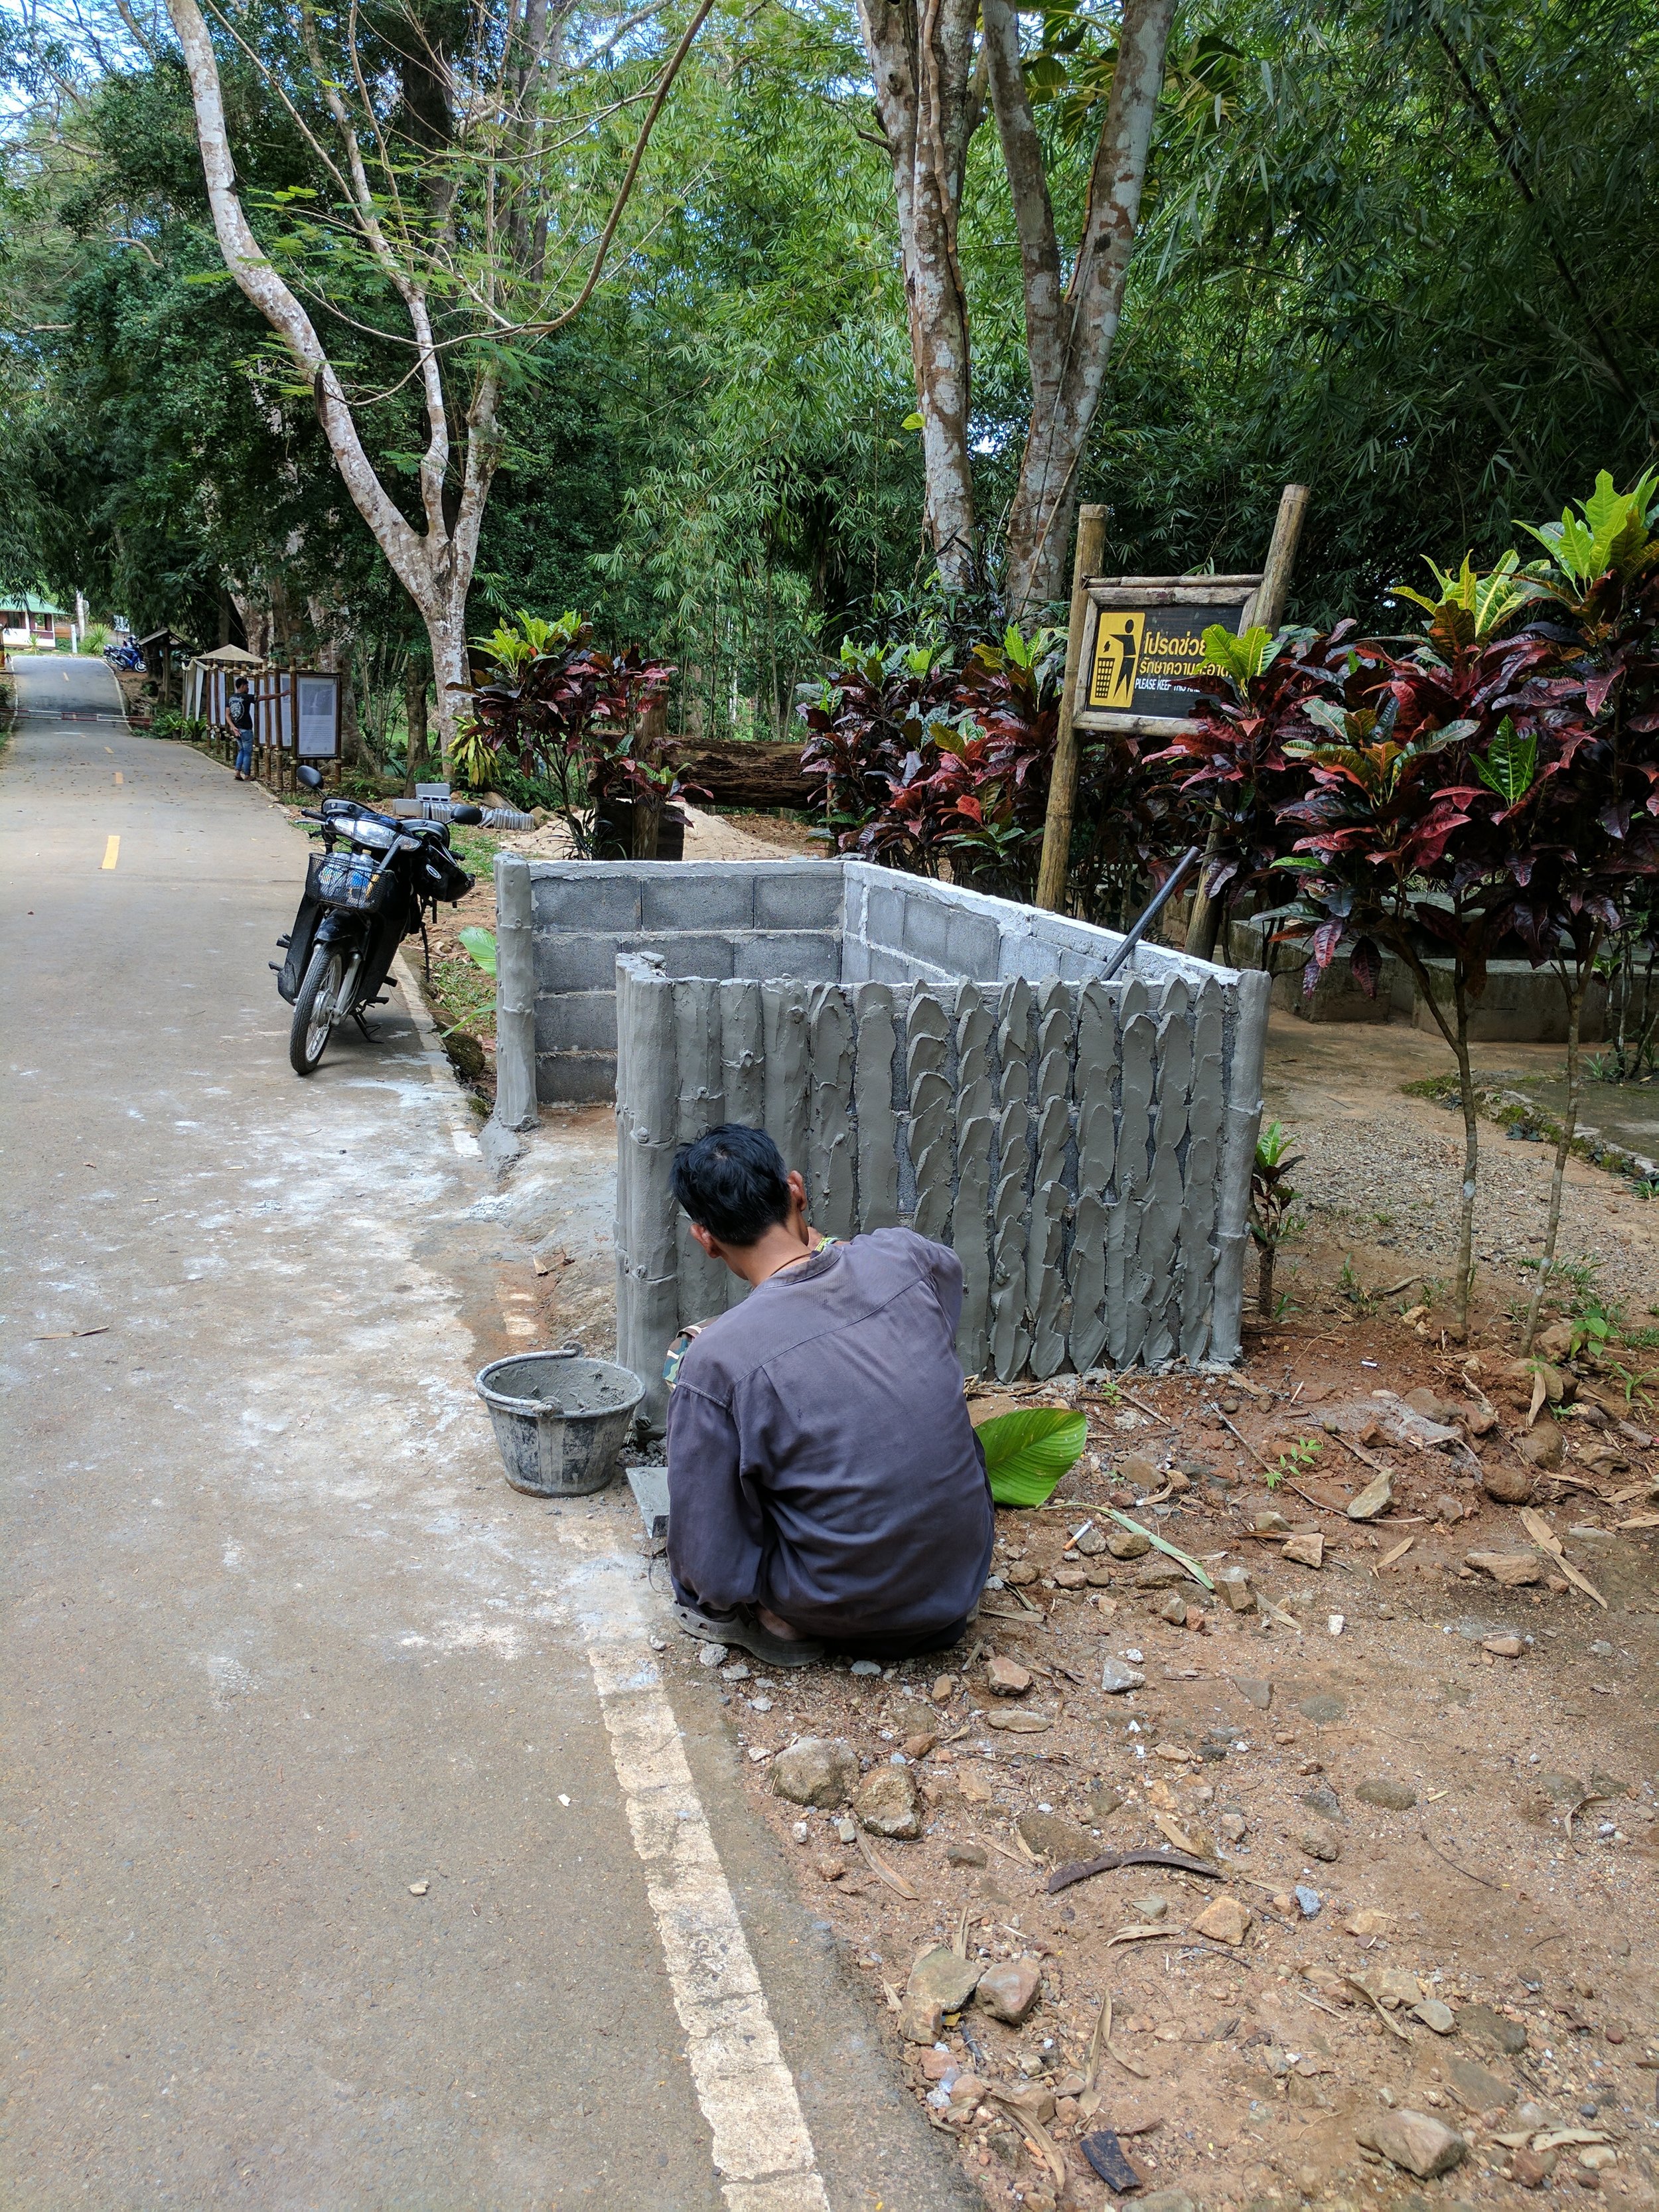 In a national park in Phuket, I passed a worker creating a cement fence around some trash cans. 